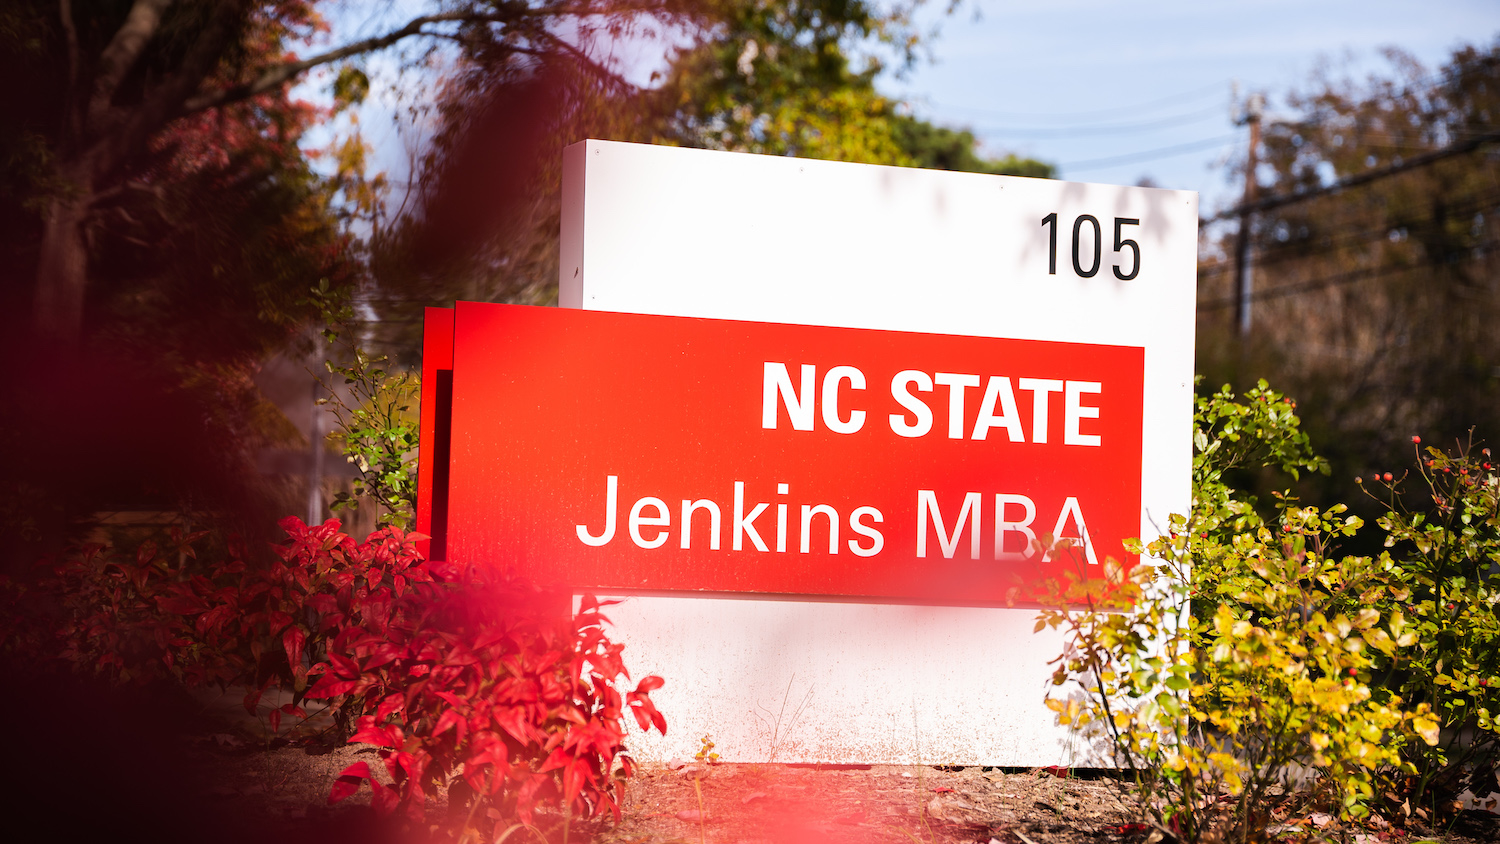 NC State Jenkins MBA sign.